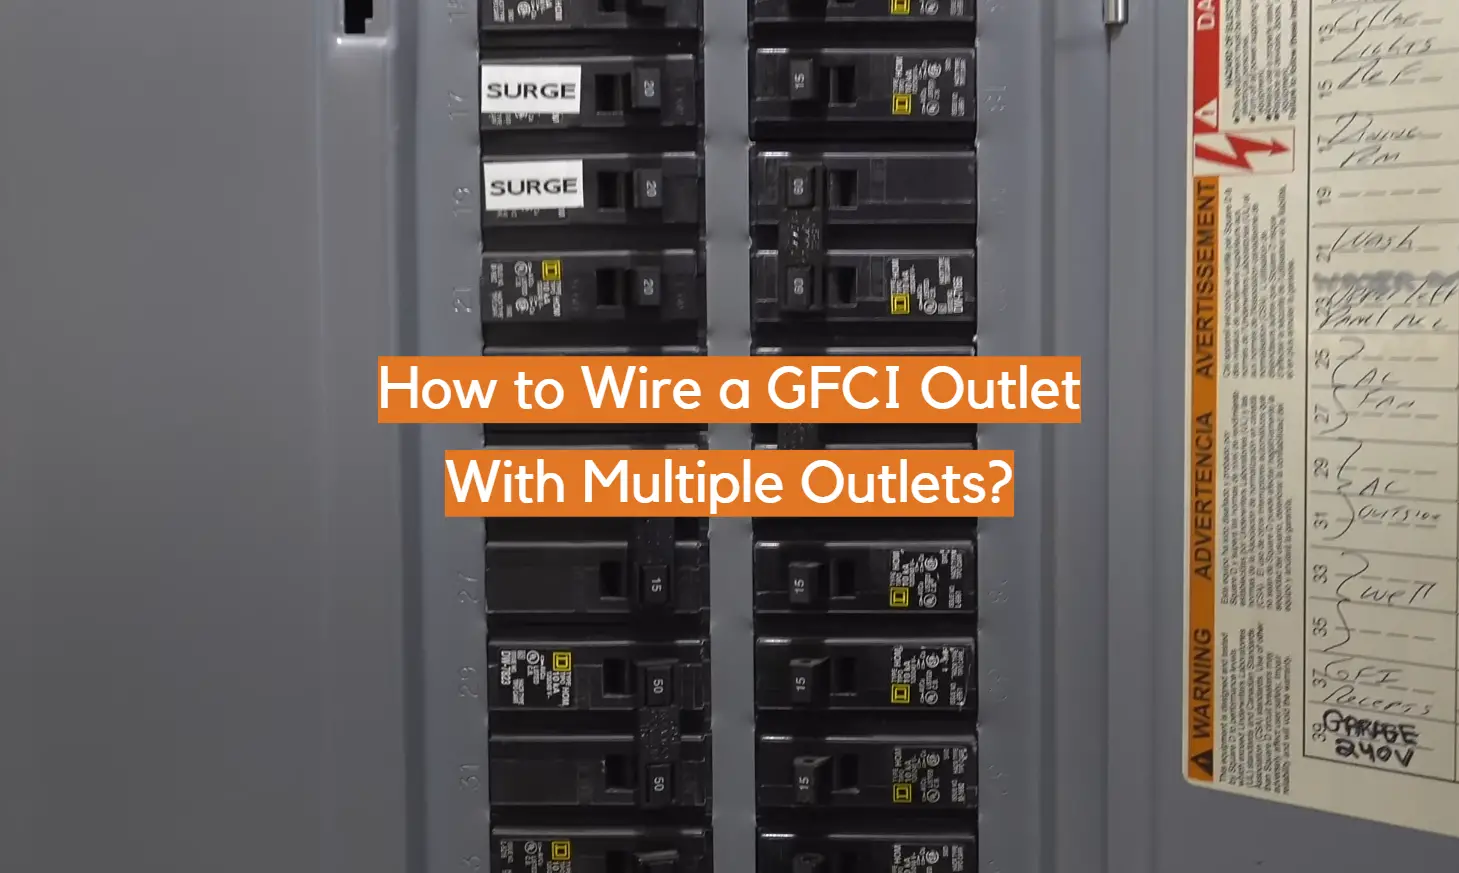 How to Wire a GFCI Outlet With Multiple Outlets?